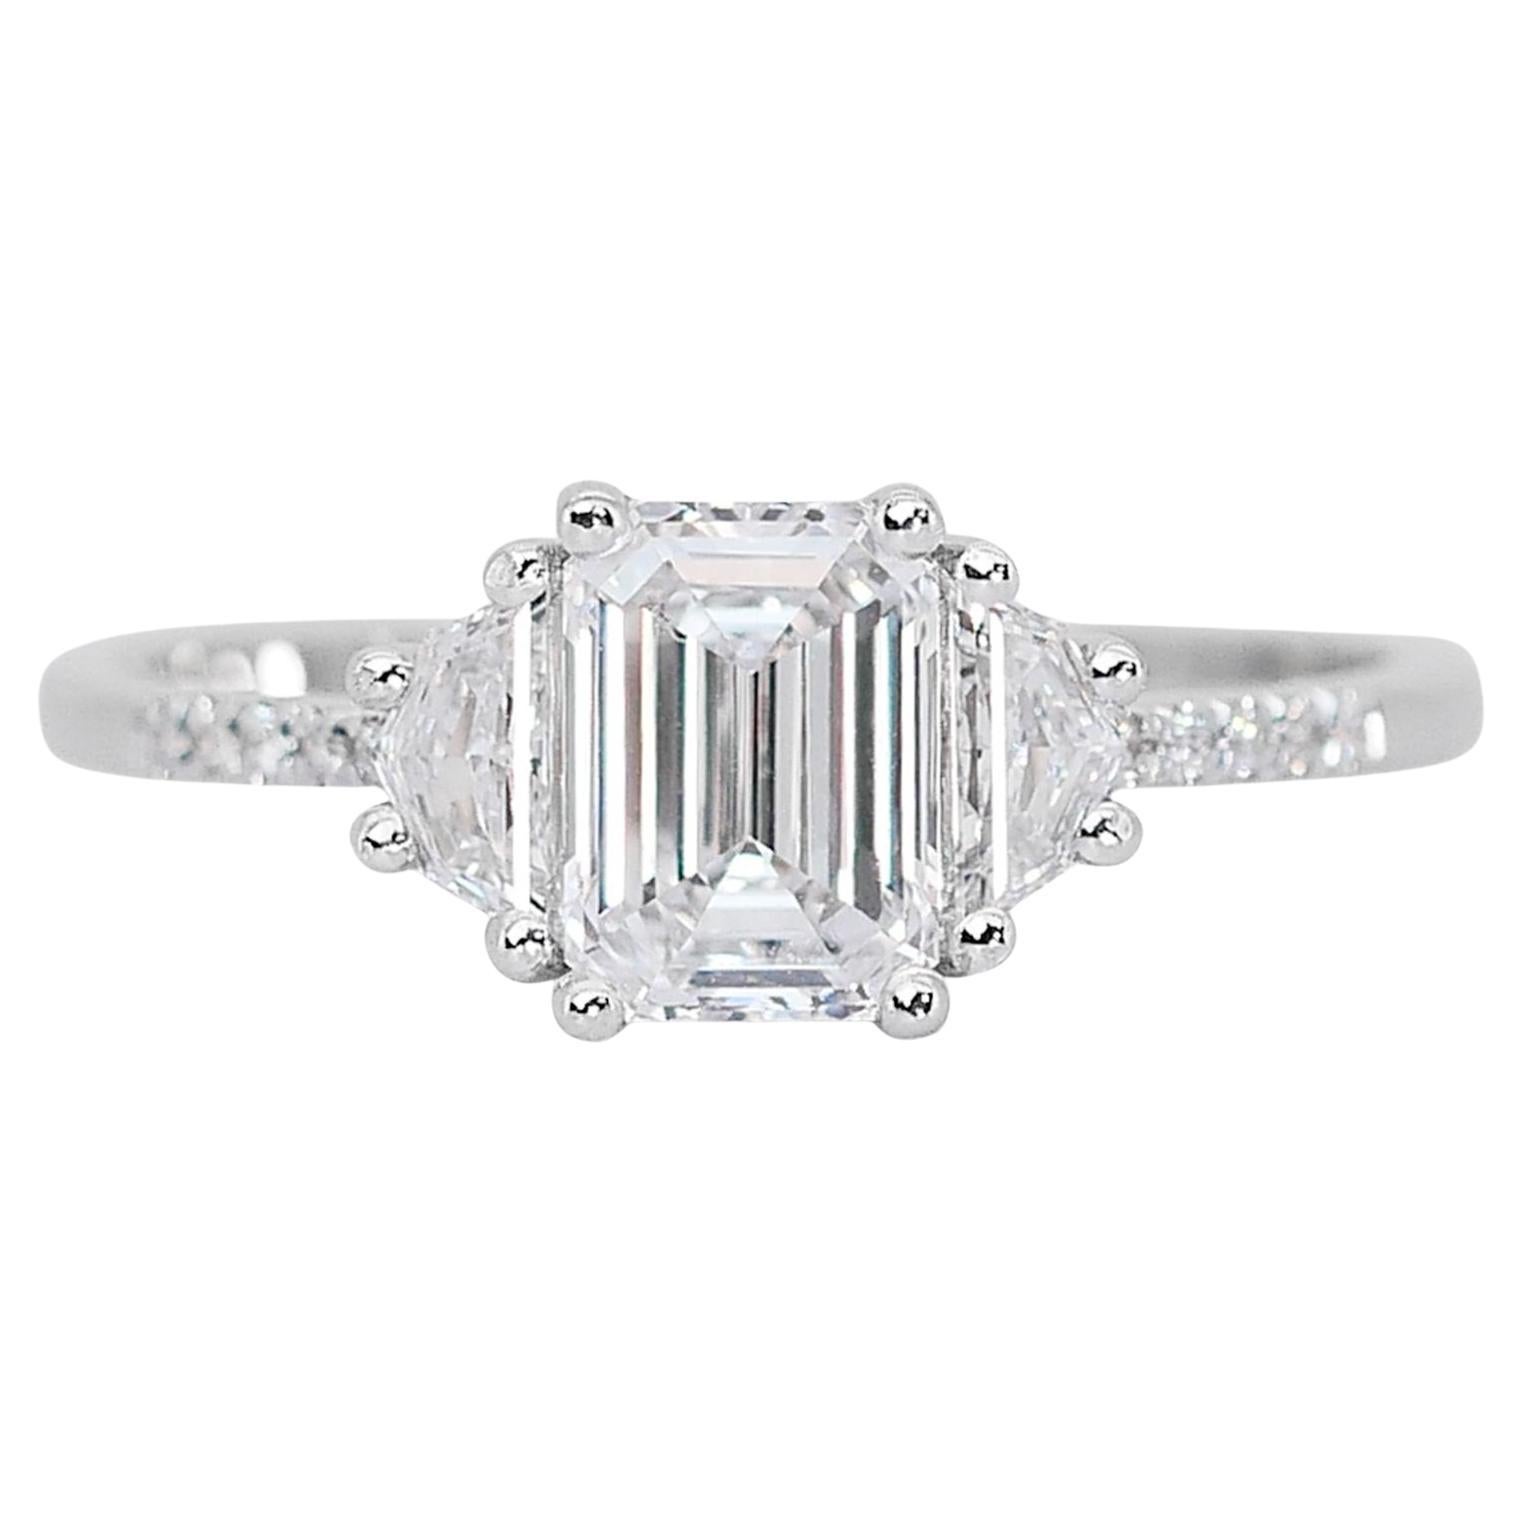 Luxurious 1.20ct Diamond 3-Stone Ring in 18k White Gold - GIA Certified  For Sale